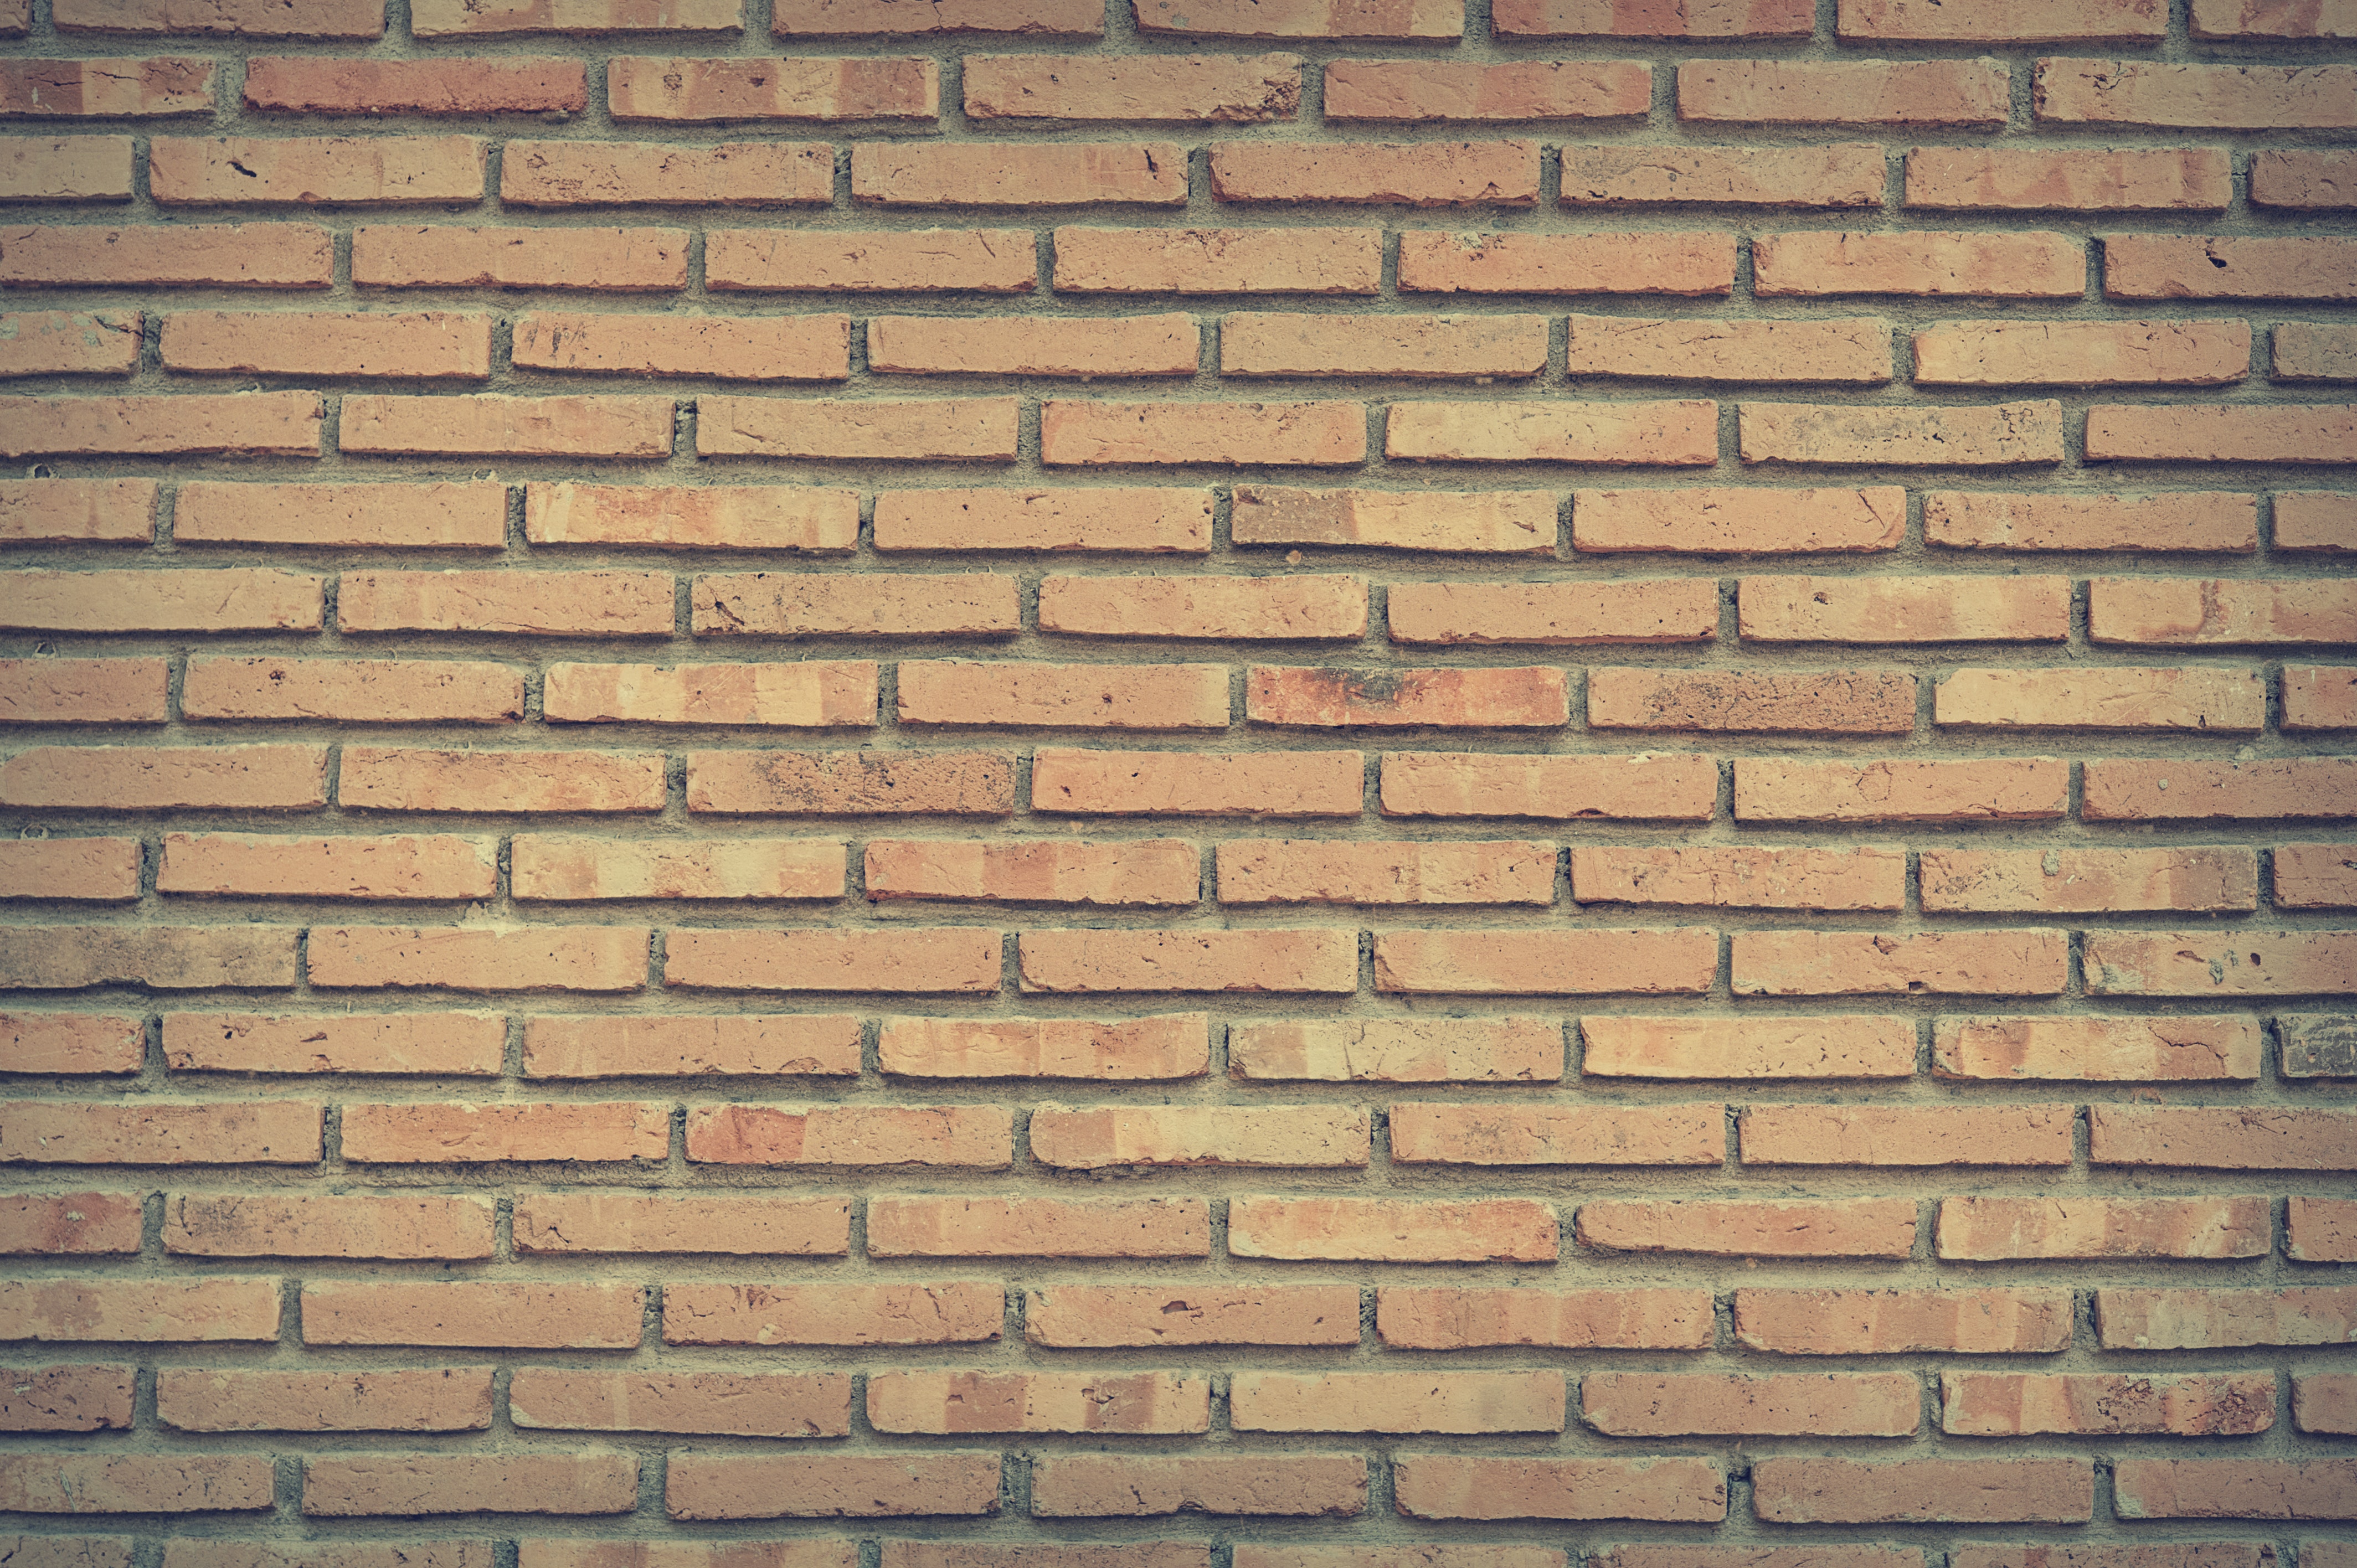 Brown Bricked Wall, Architecture, Rock, Urban, Tile, HQ Photo